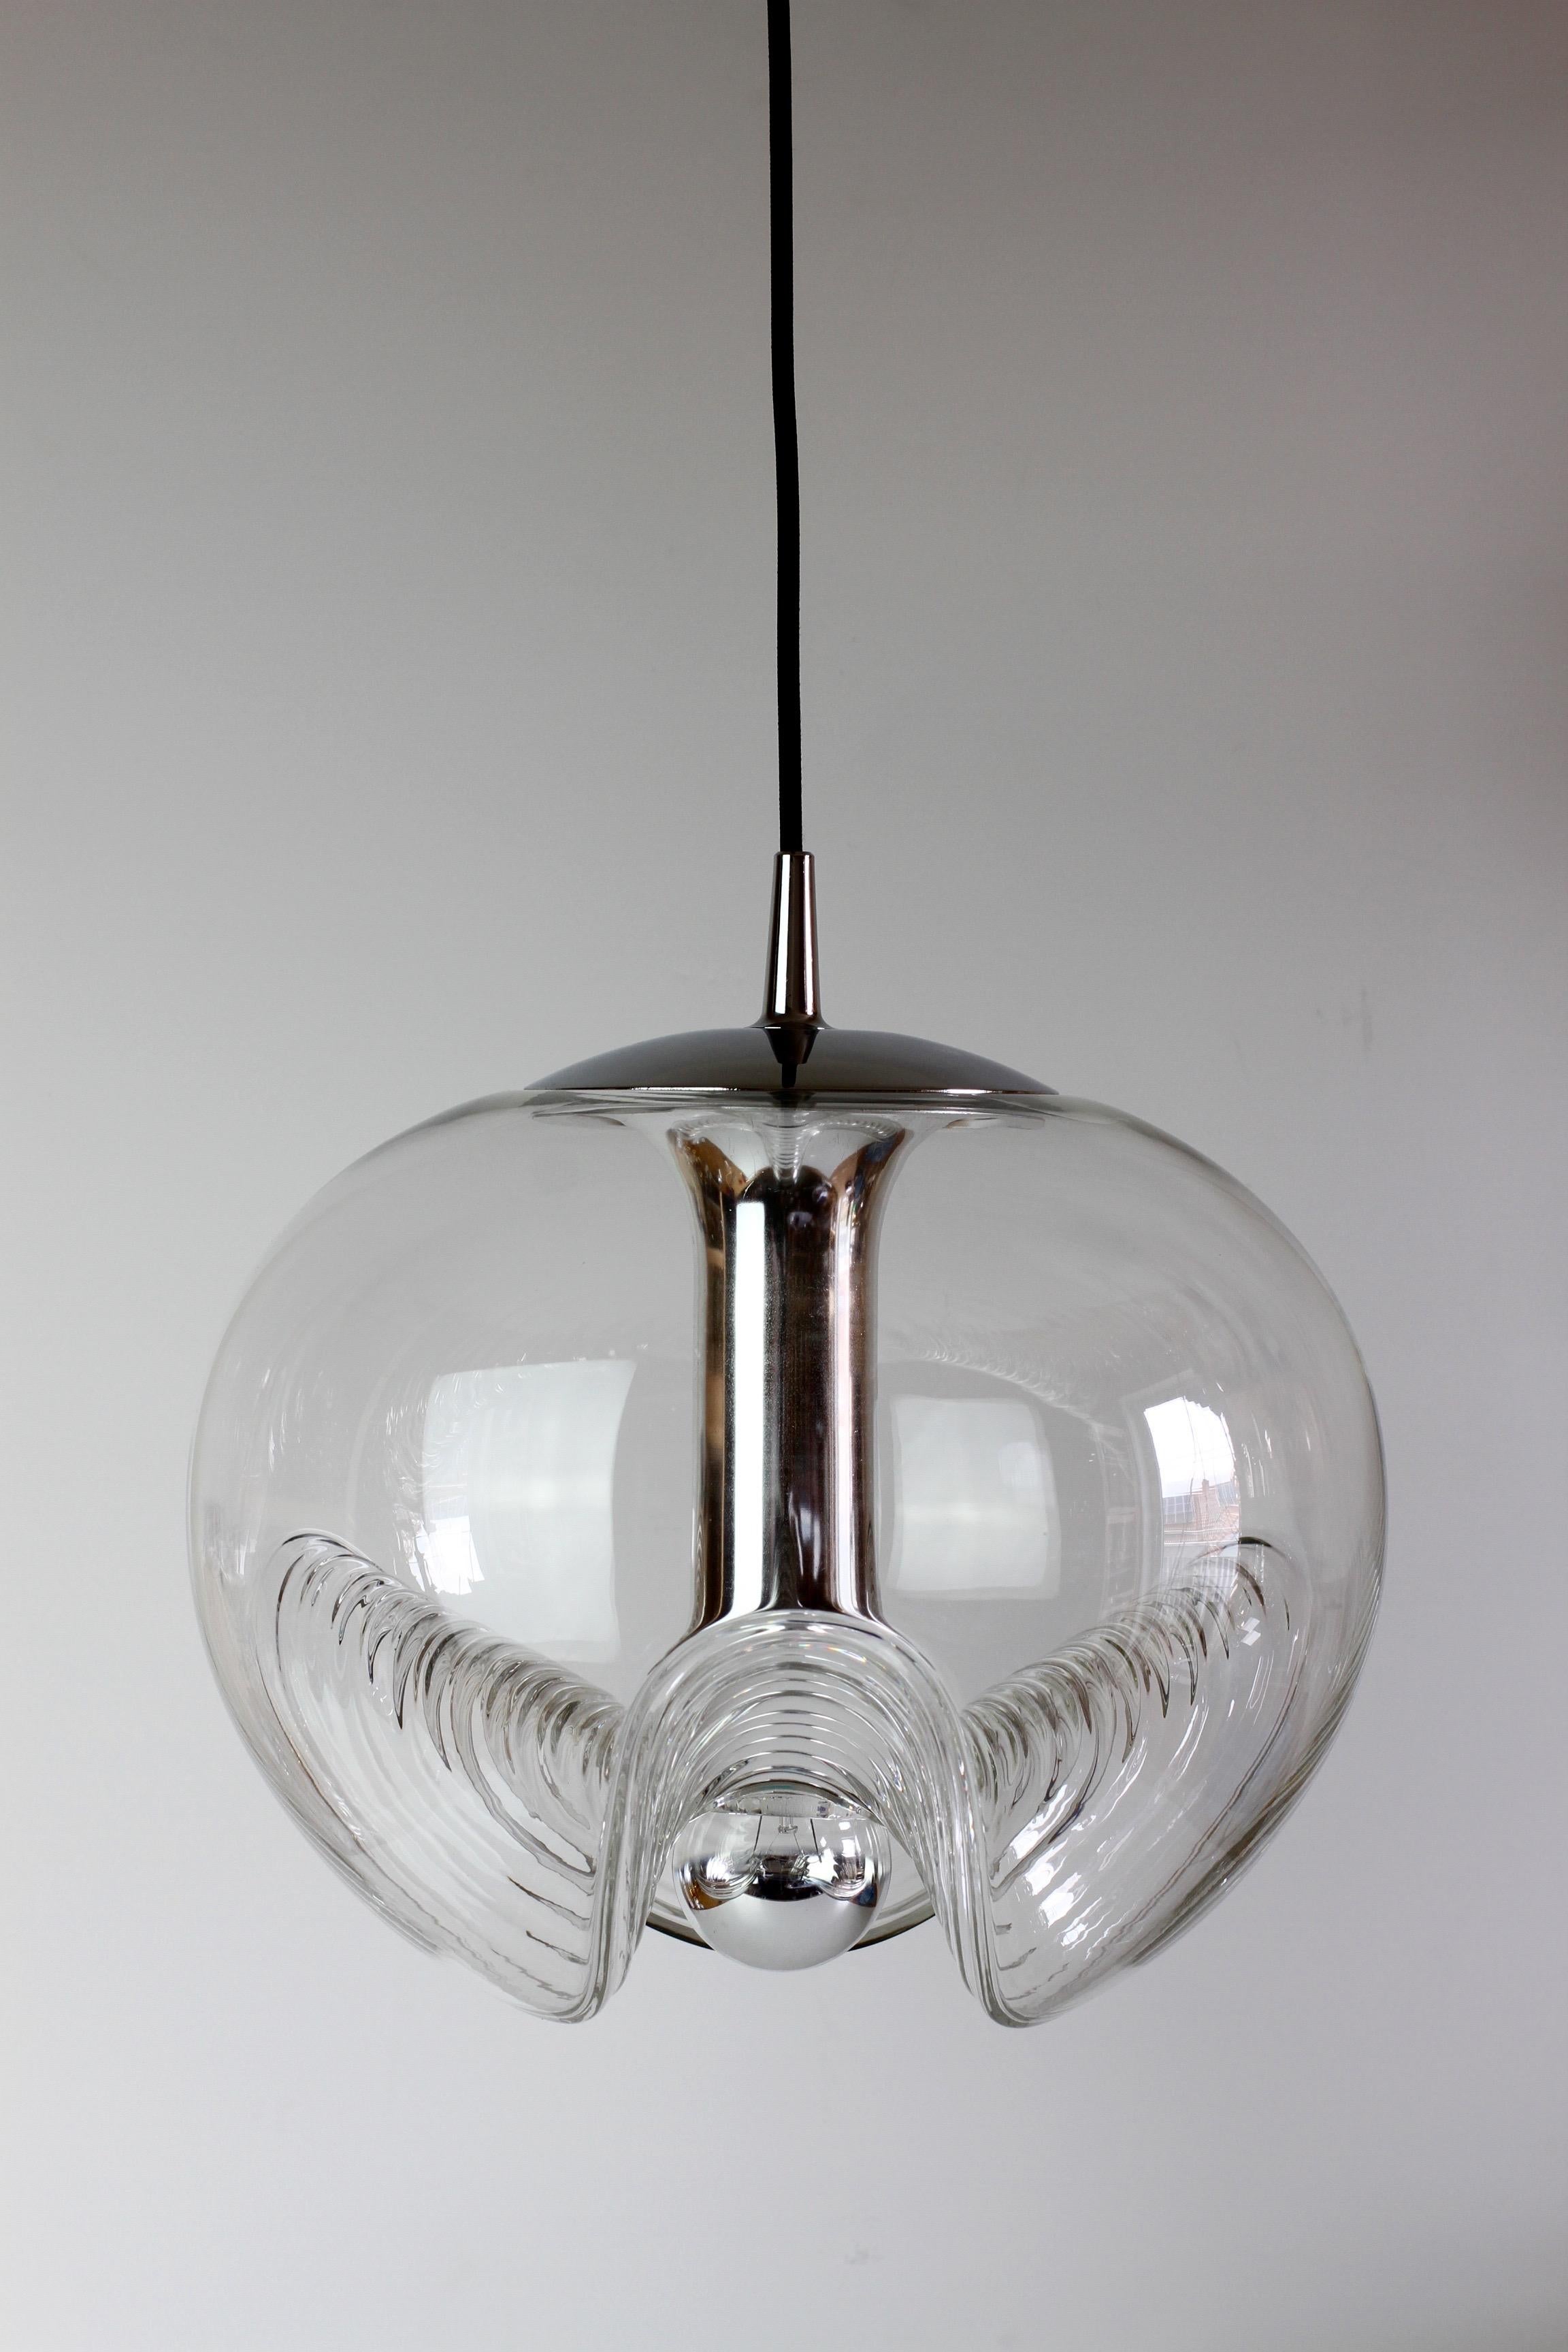 One of a set of ten (rare to find in such a quantity) beautiful mid-century designed hanging ceiling pendant lights by iconic German lighting manufacturer Peill & Putzler in the 1970s. This is an absolutely classic piece of design, featuring a clear